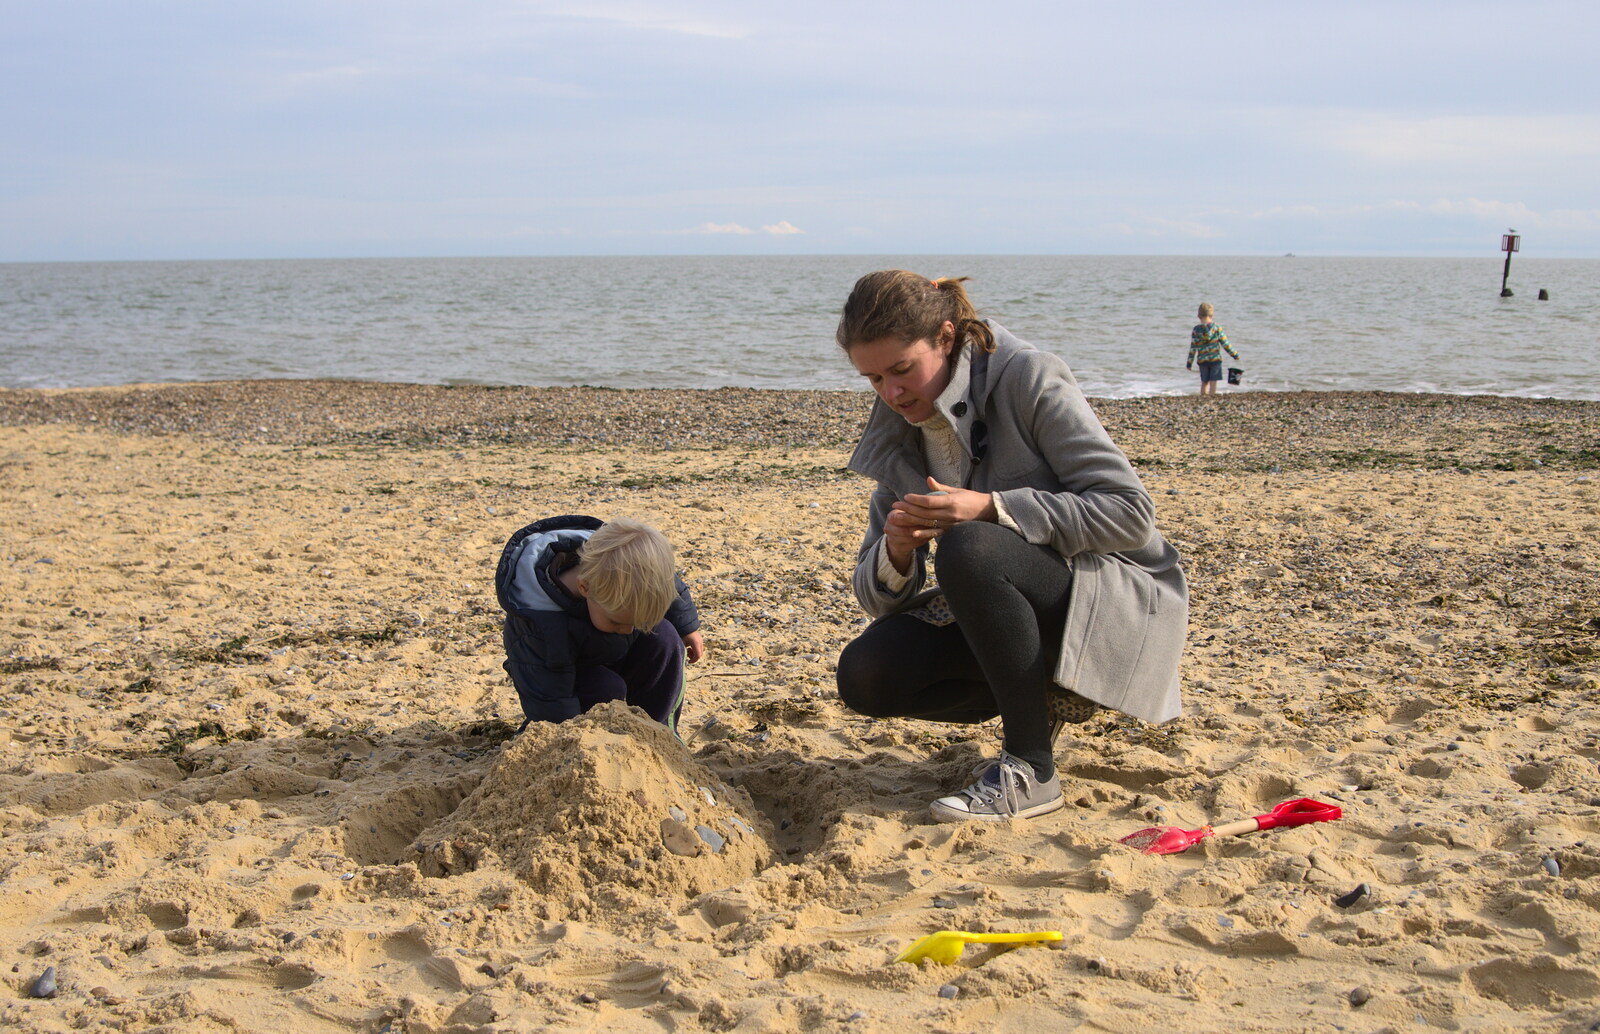 Harry digs a hole from On The Beach Again, Southwold, Suffolk - 12th October 2014